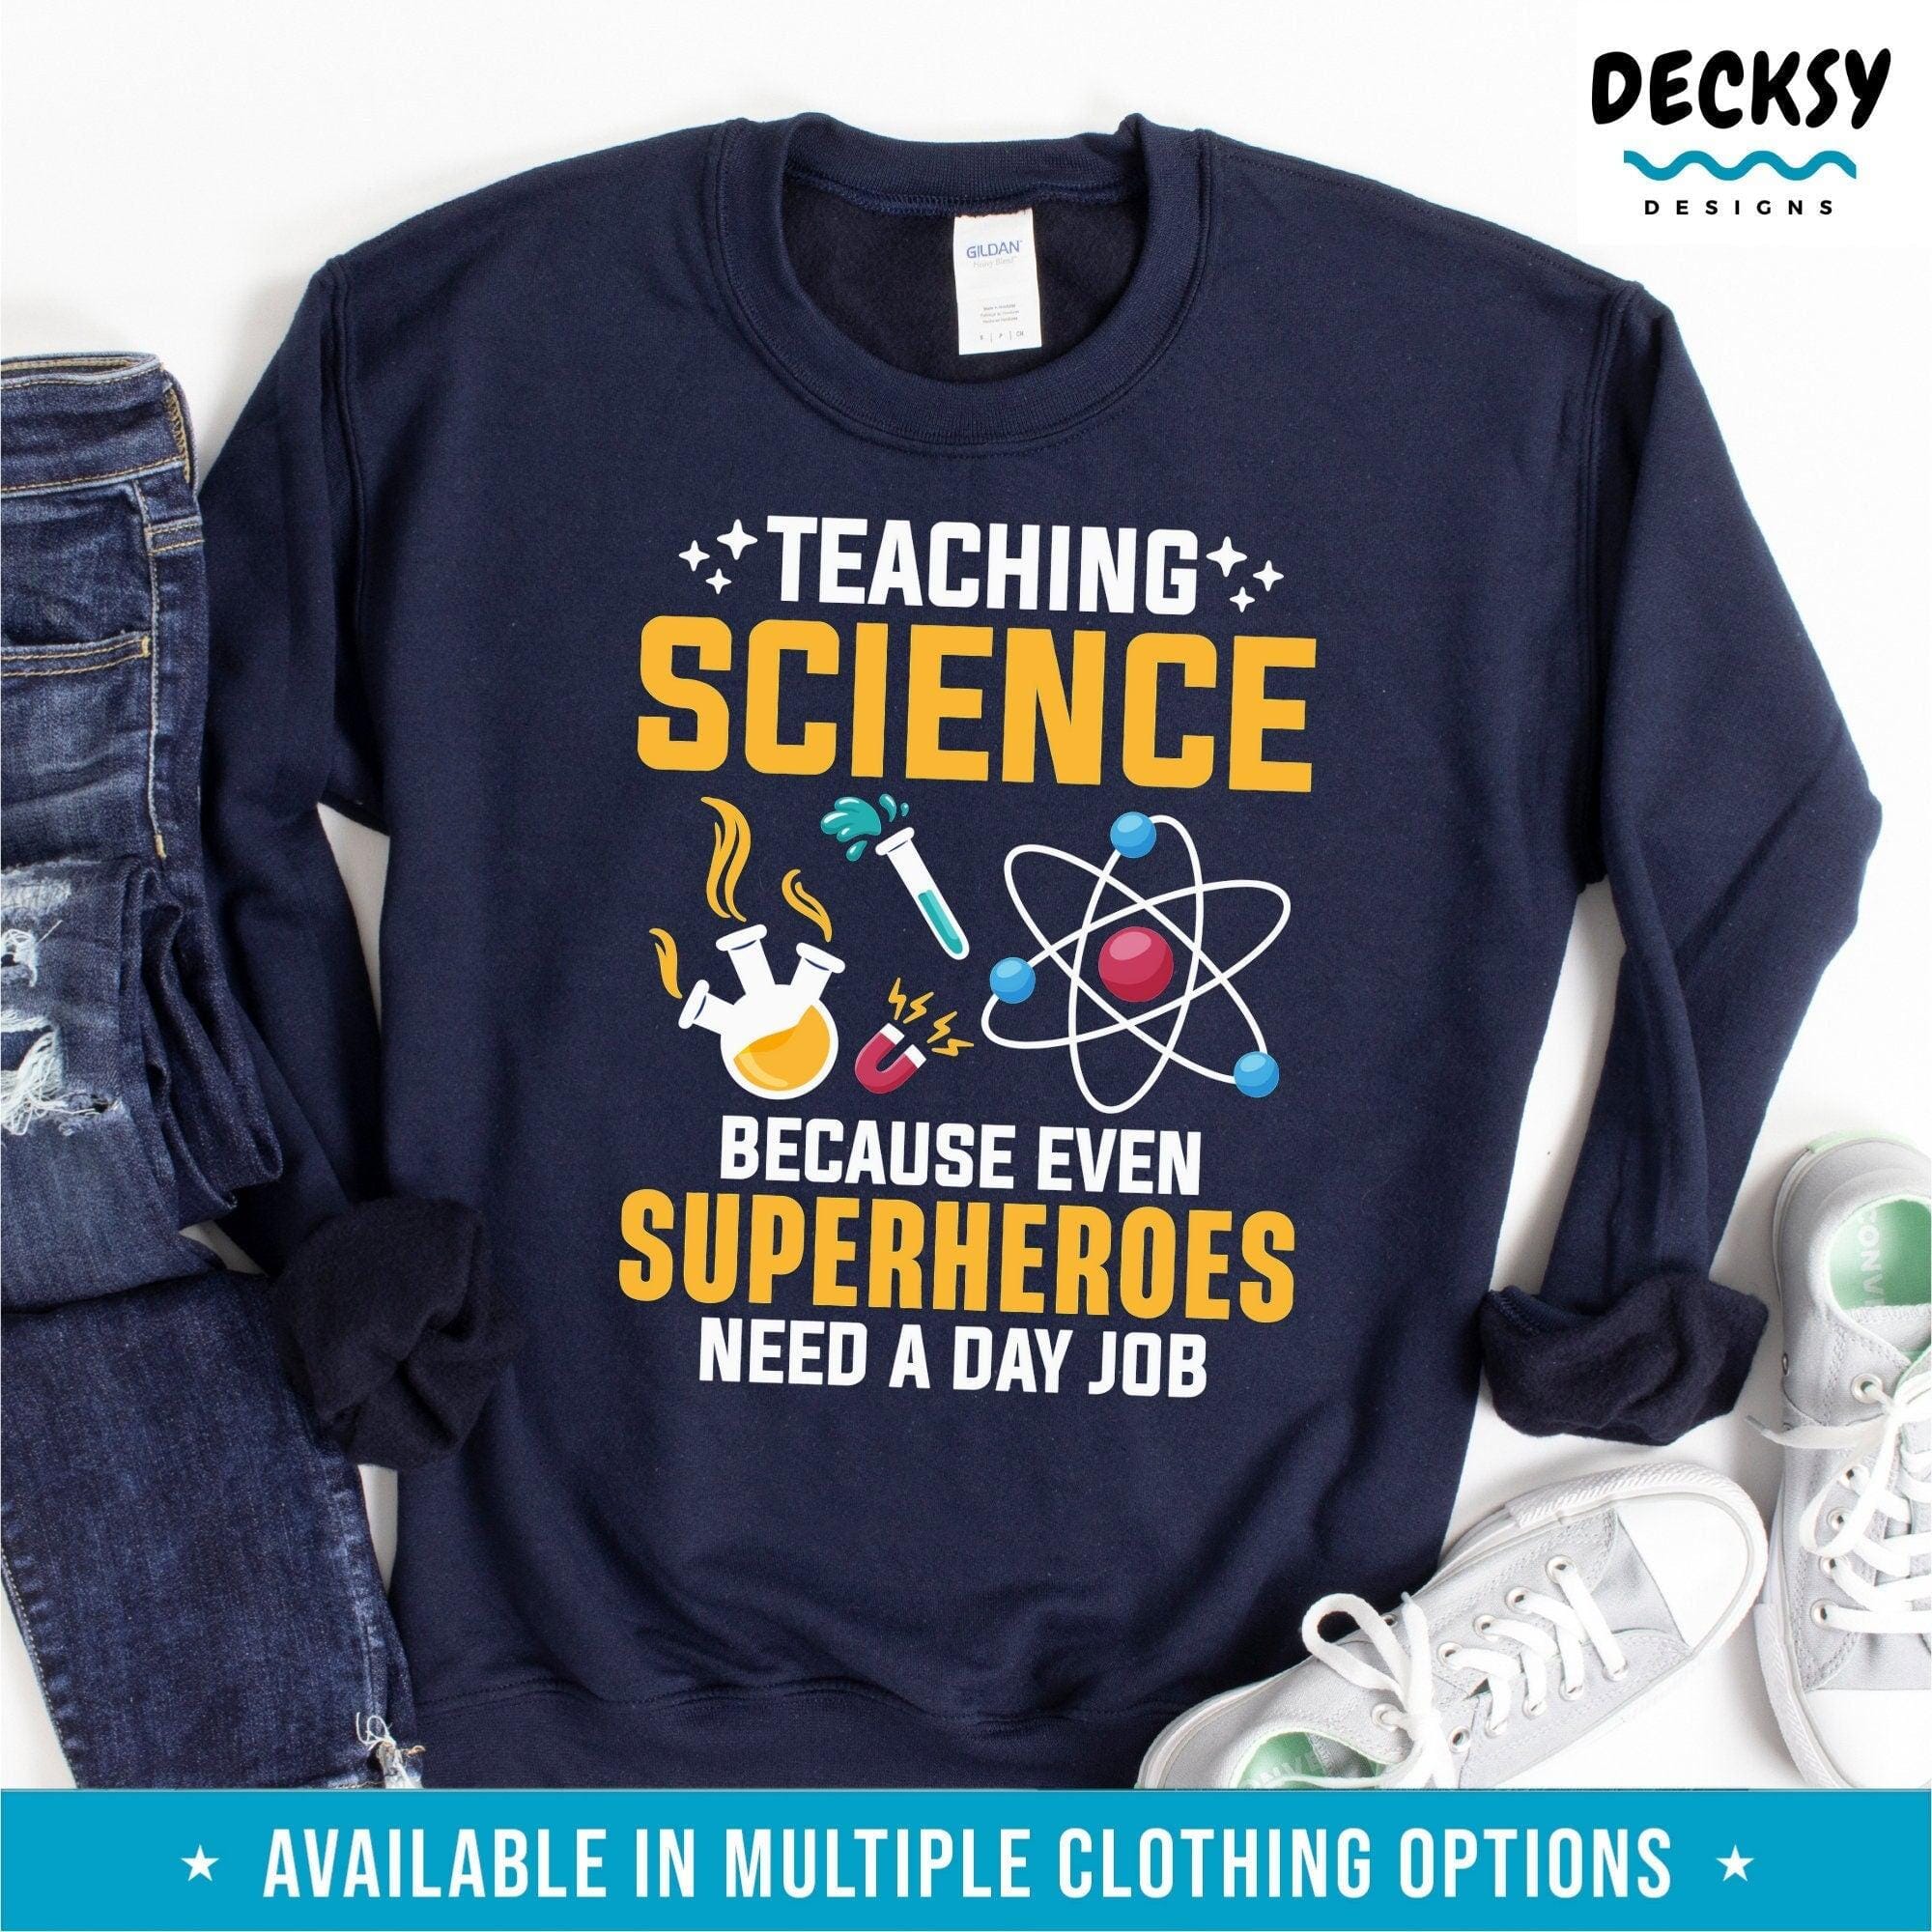 Science Teacher Shirt, School Teaching Gift-Clothing:Gender-Neutral Adult Clothing:Tops & Tees:T-shirts:Graphic Tees-DecksyDesigns